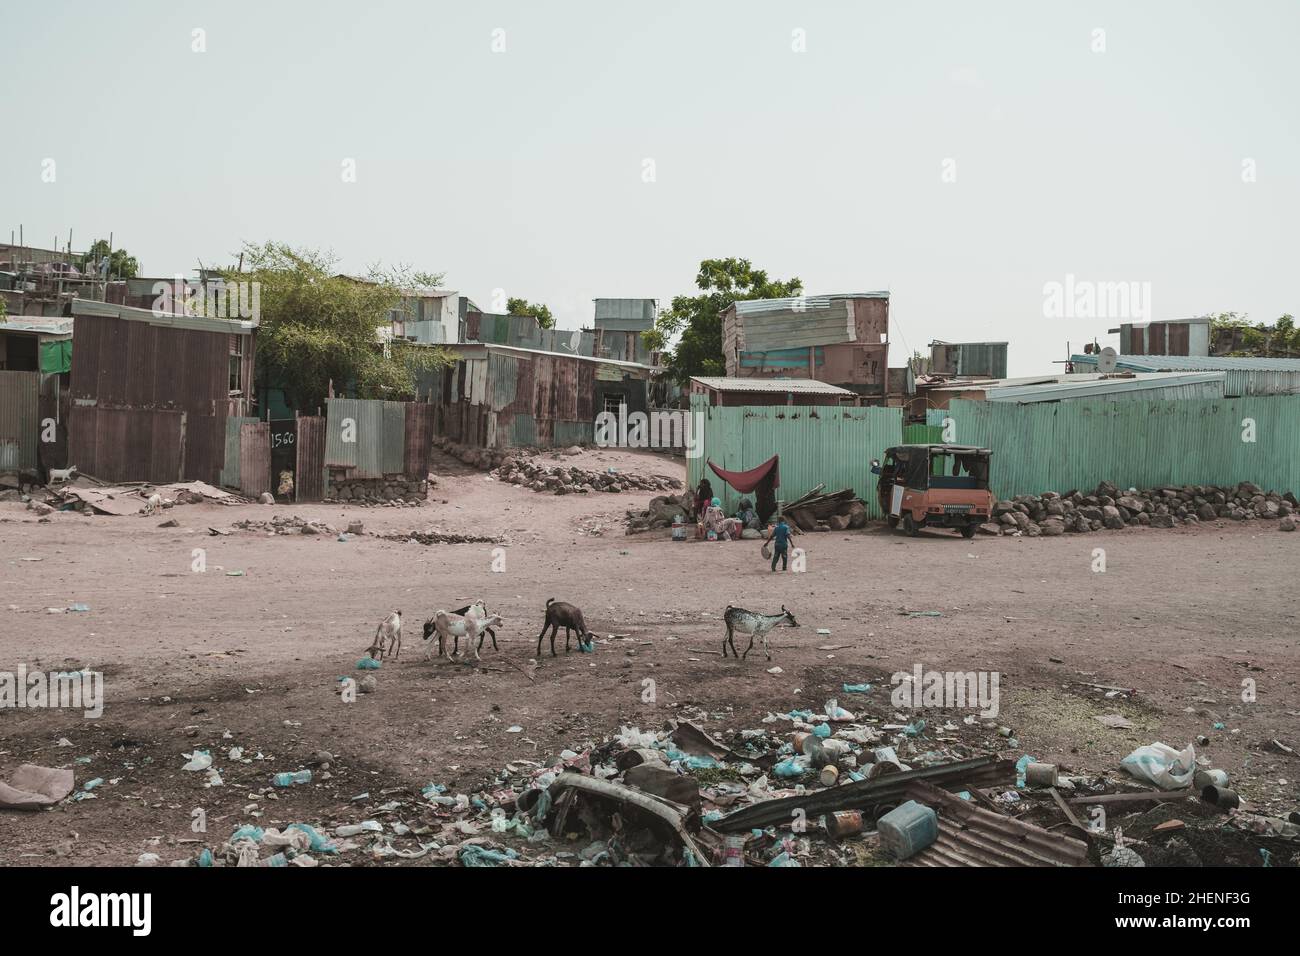 Djibouti, Djibouti - May 21, 2021: A small and poor shack town in Djibouti. Women sitting under a tent. Animals looking for food. Editorial shot in Dj Stock Photo